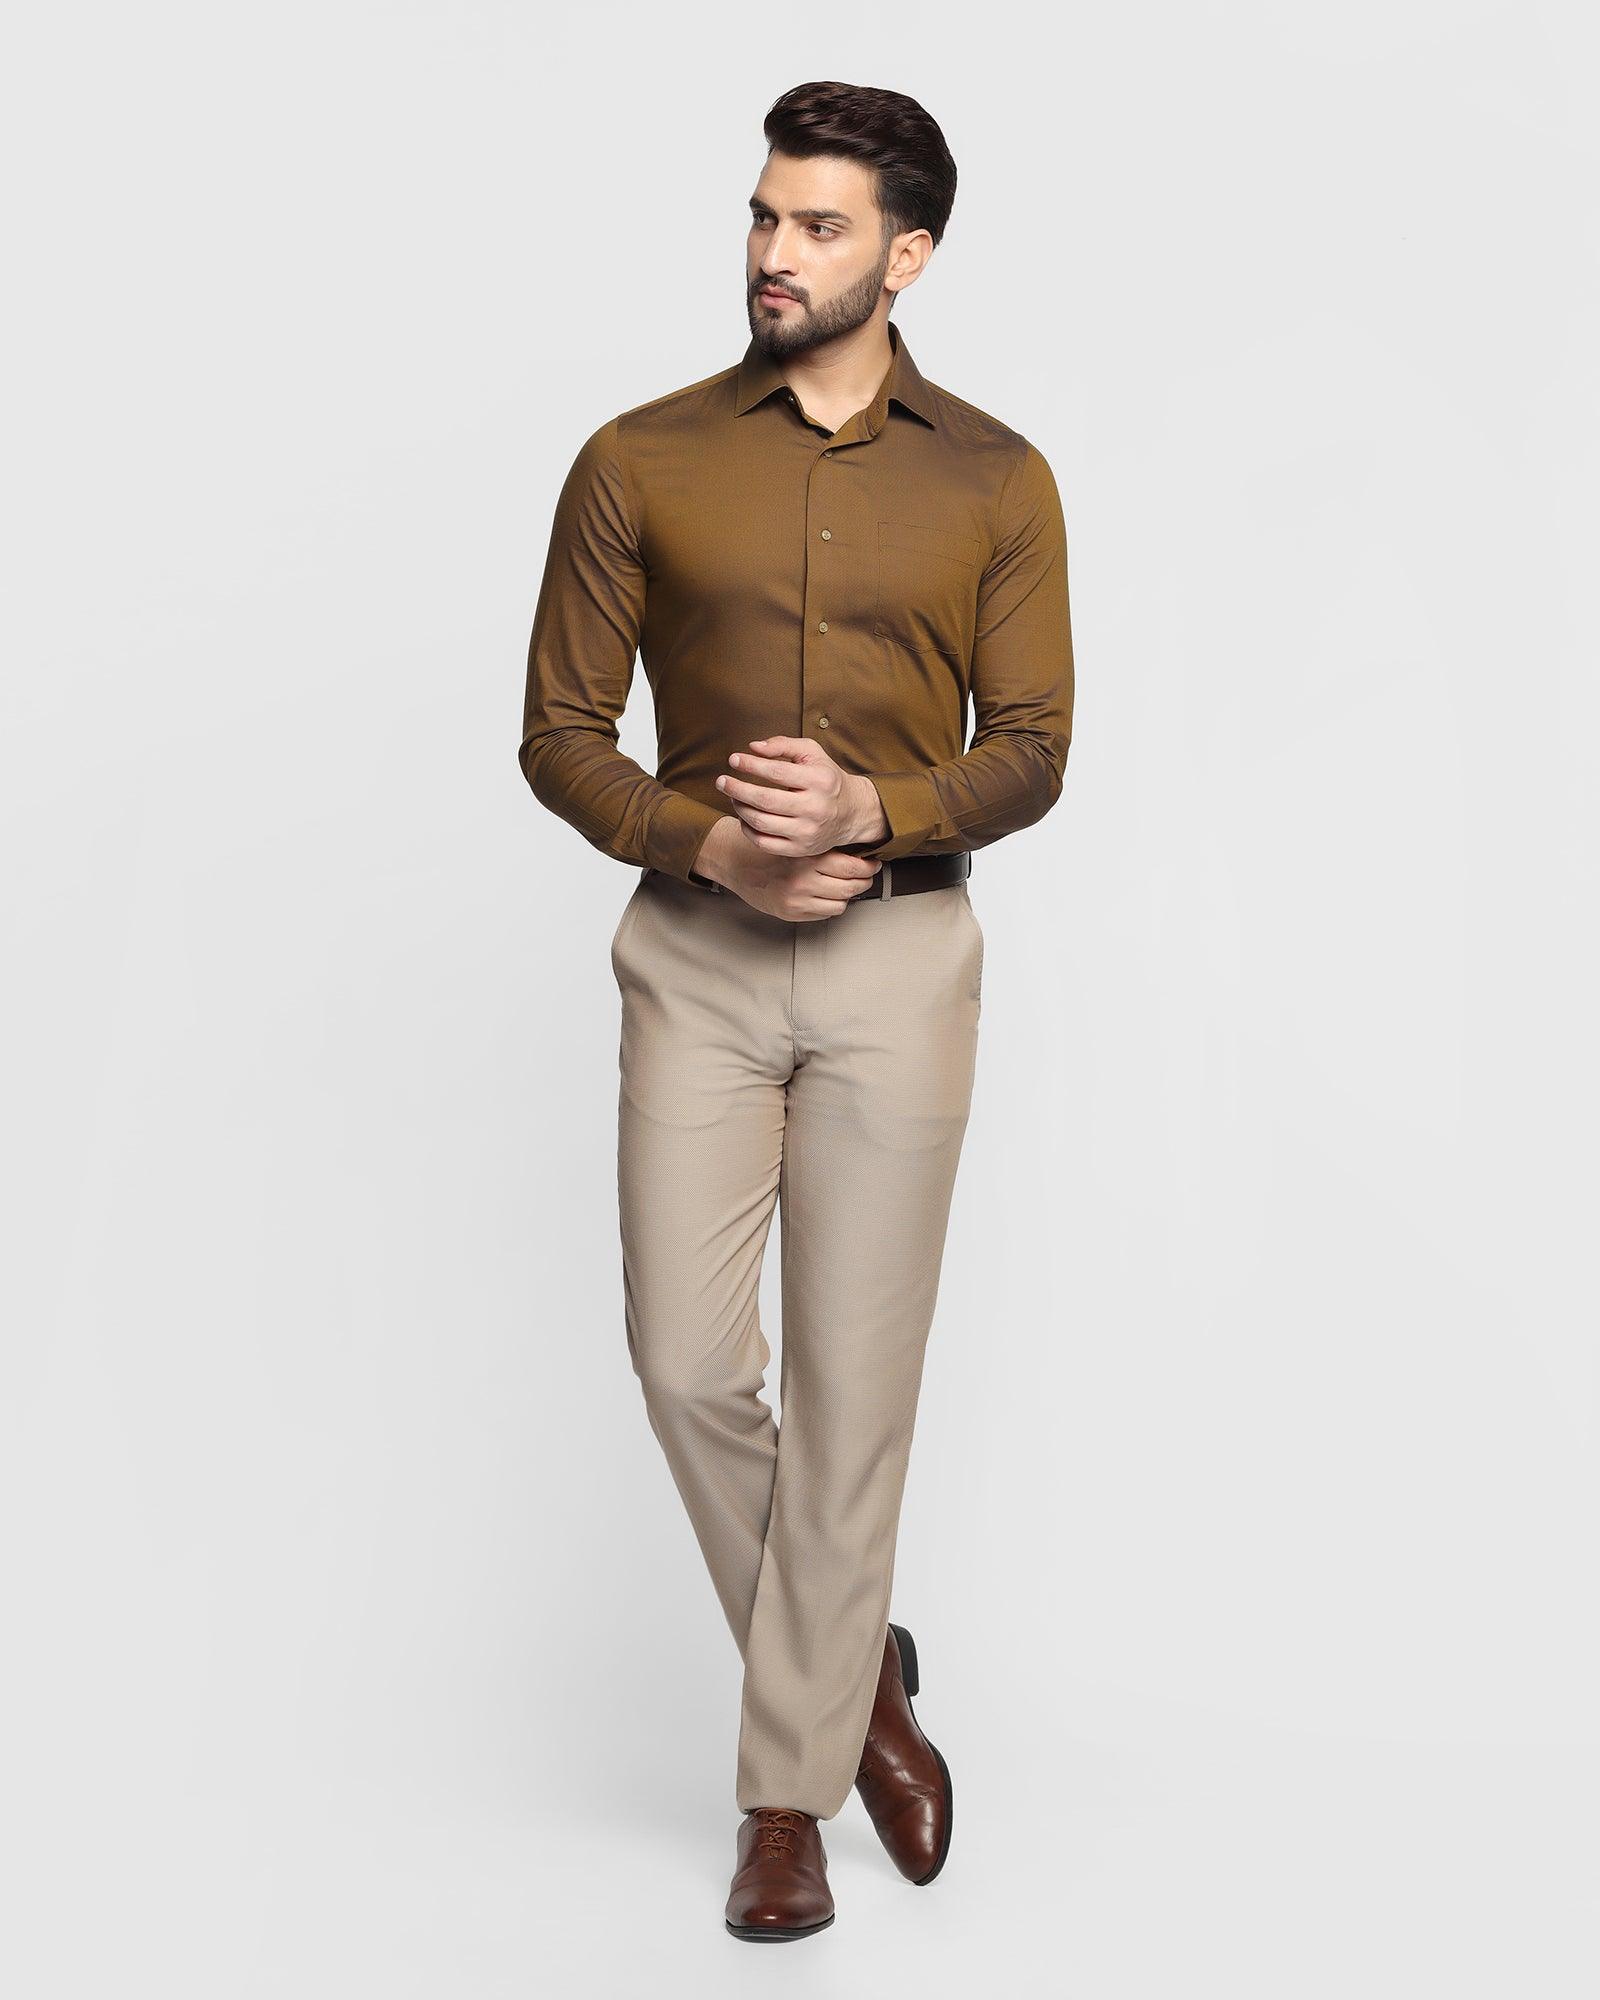 Men's formal Office Outfits with Beige Colour Pants Combination Ideas | Mens  casual outfits summer, Men fashion casual outfits, Mens outfits